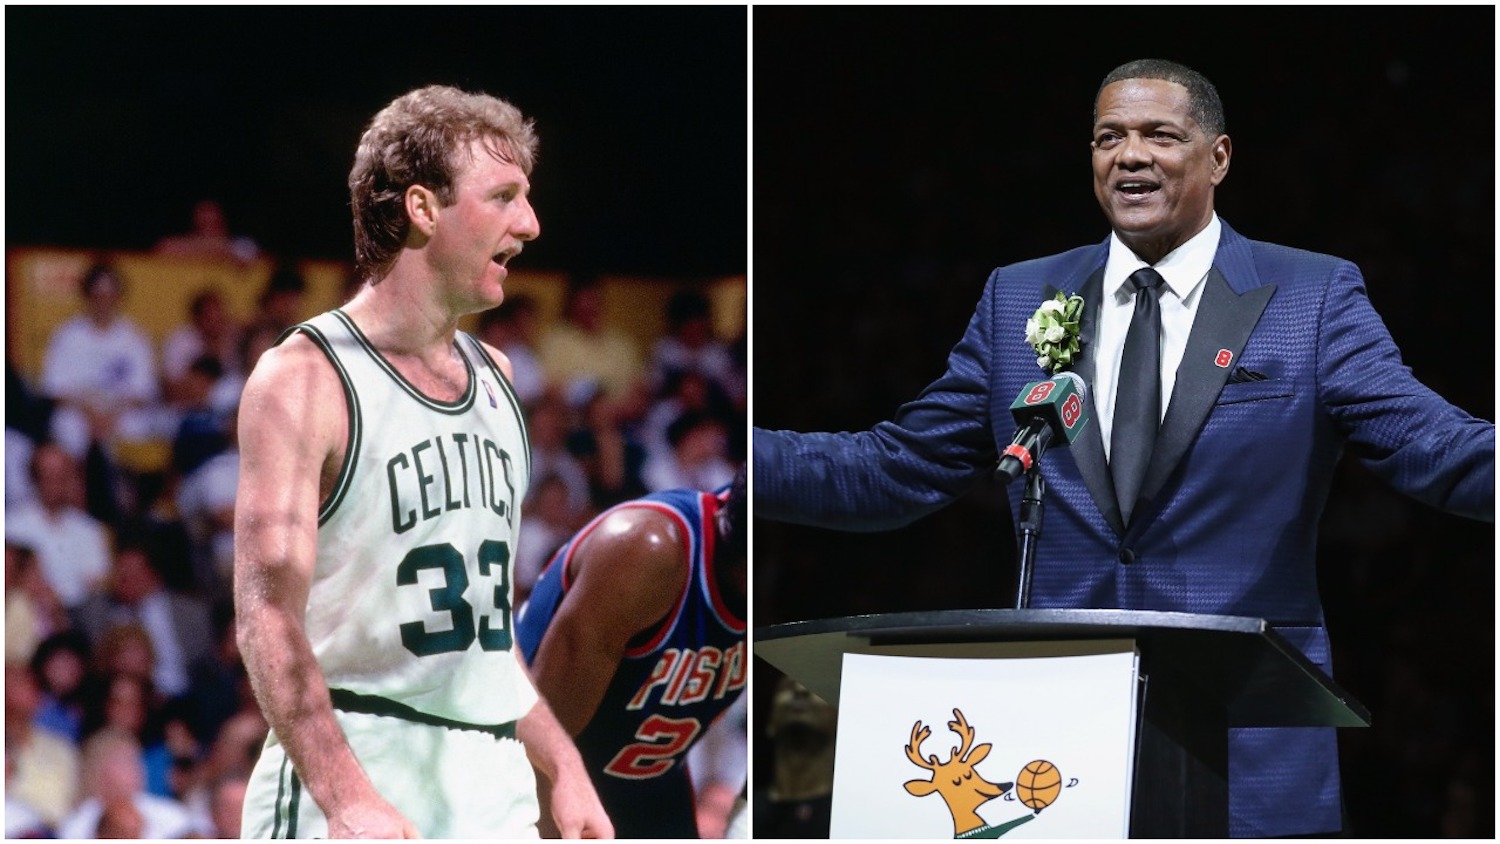 Larry Bird and Marques Johnson did battle in the NBA's Eastern Conference over the years.